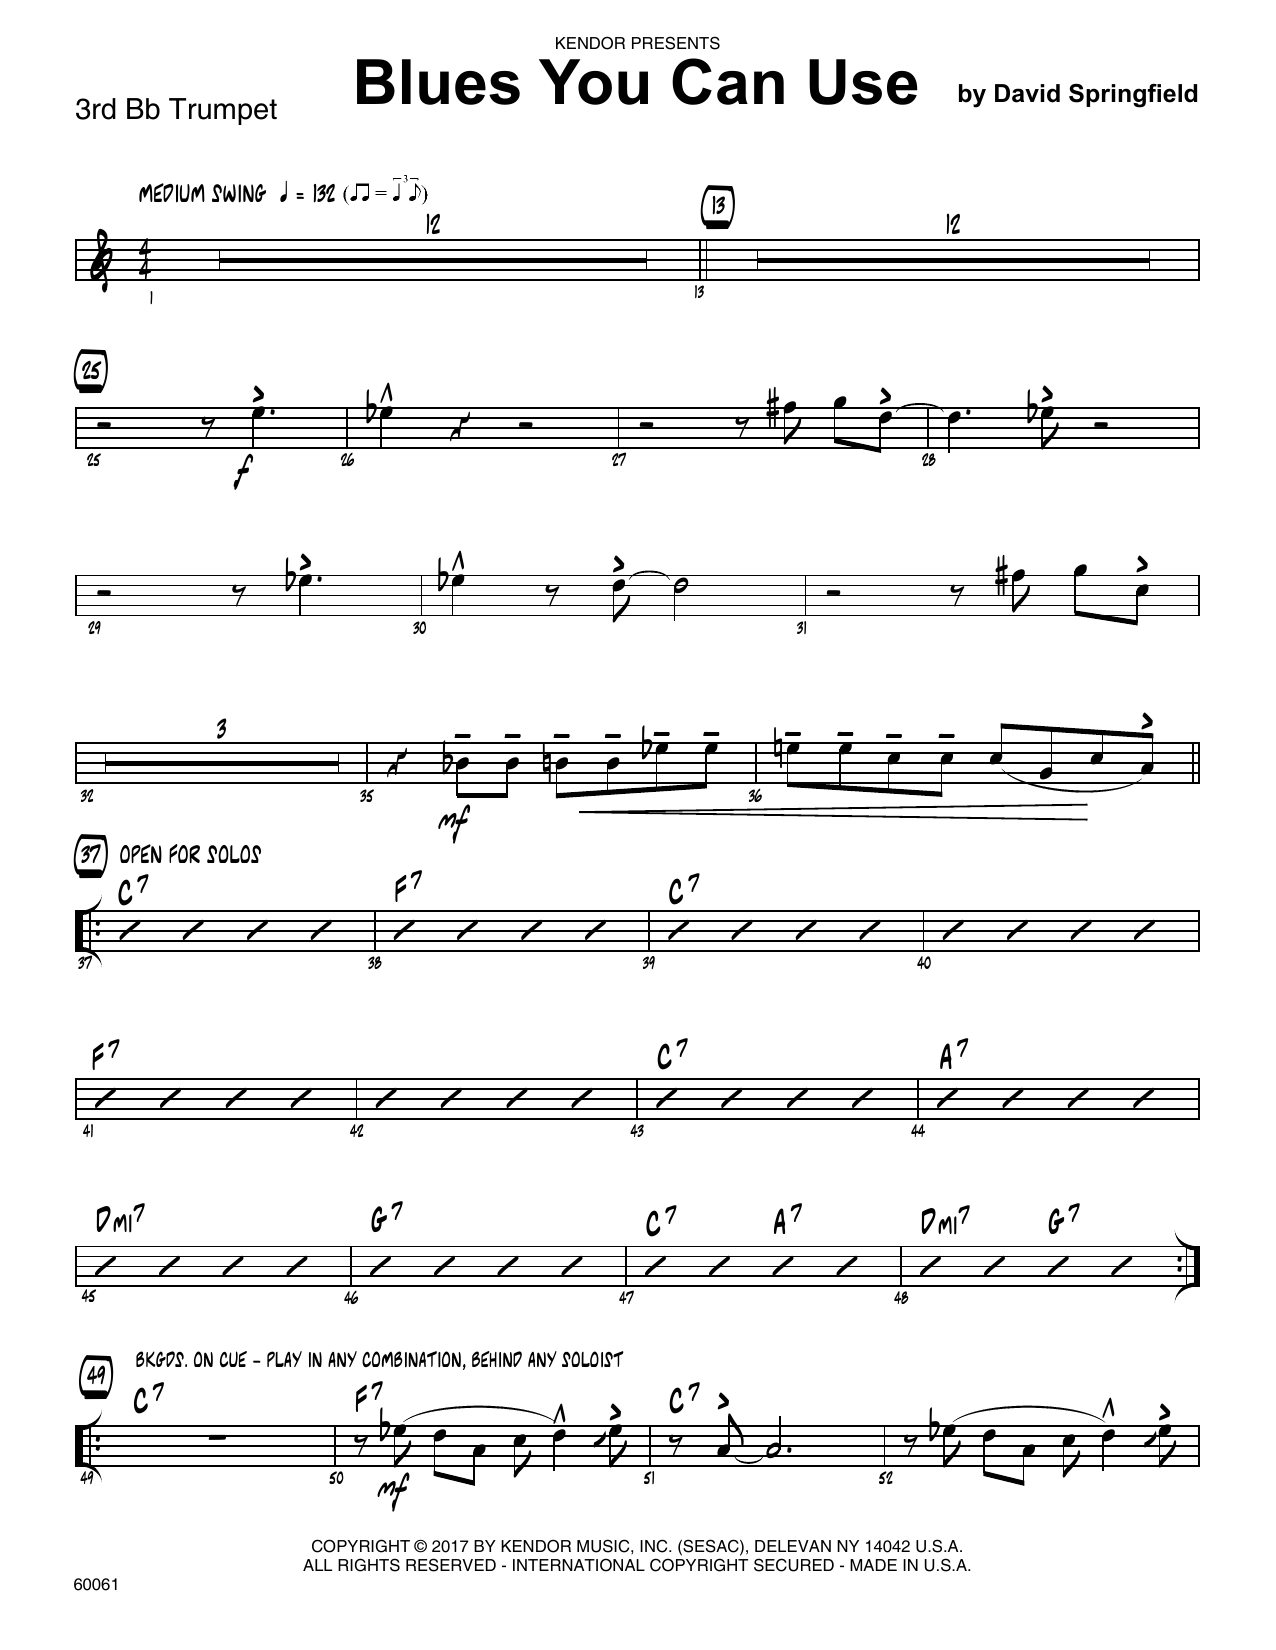 Download David Springfield Blues You Can Use - 3rd Bb Trumpet Sheet Music